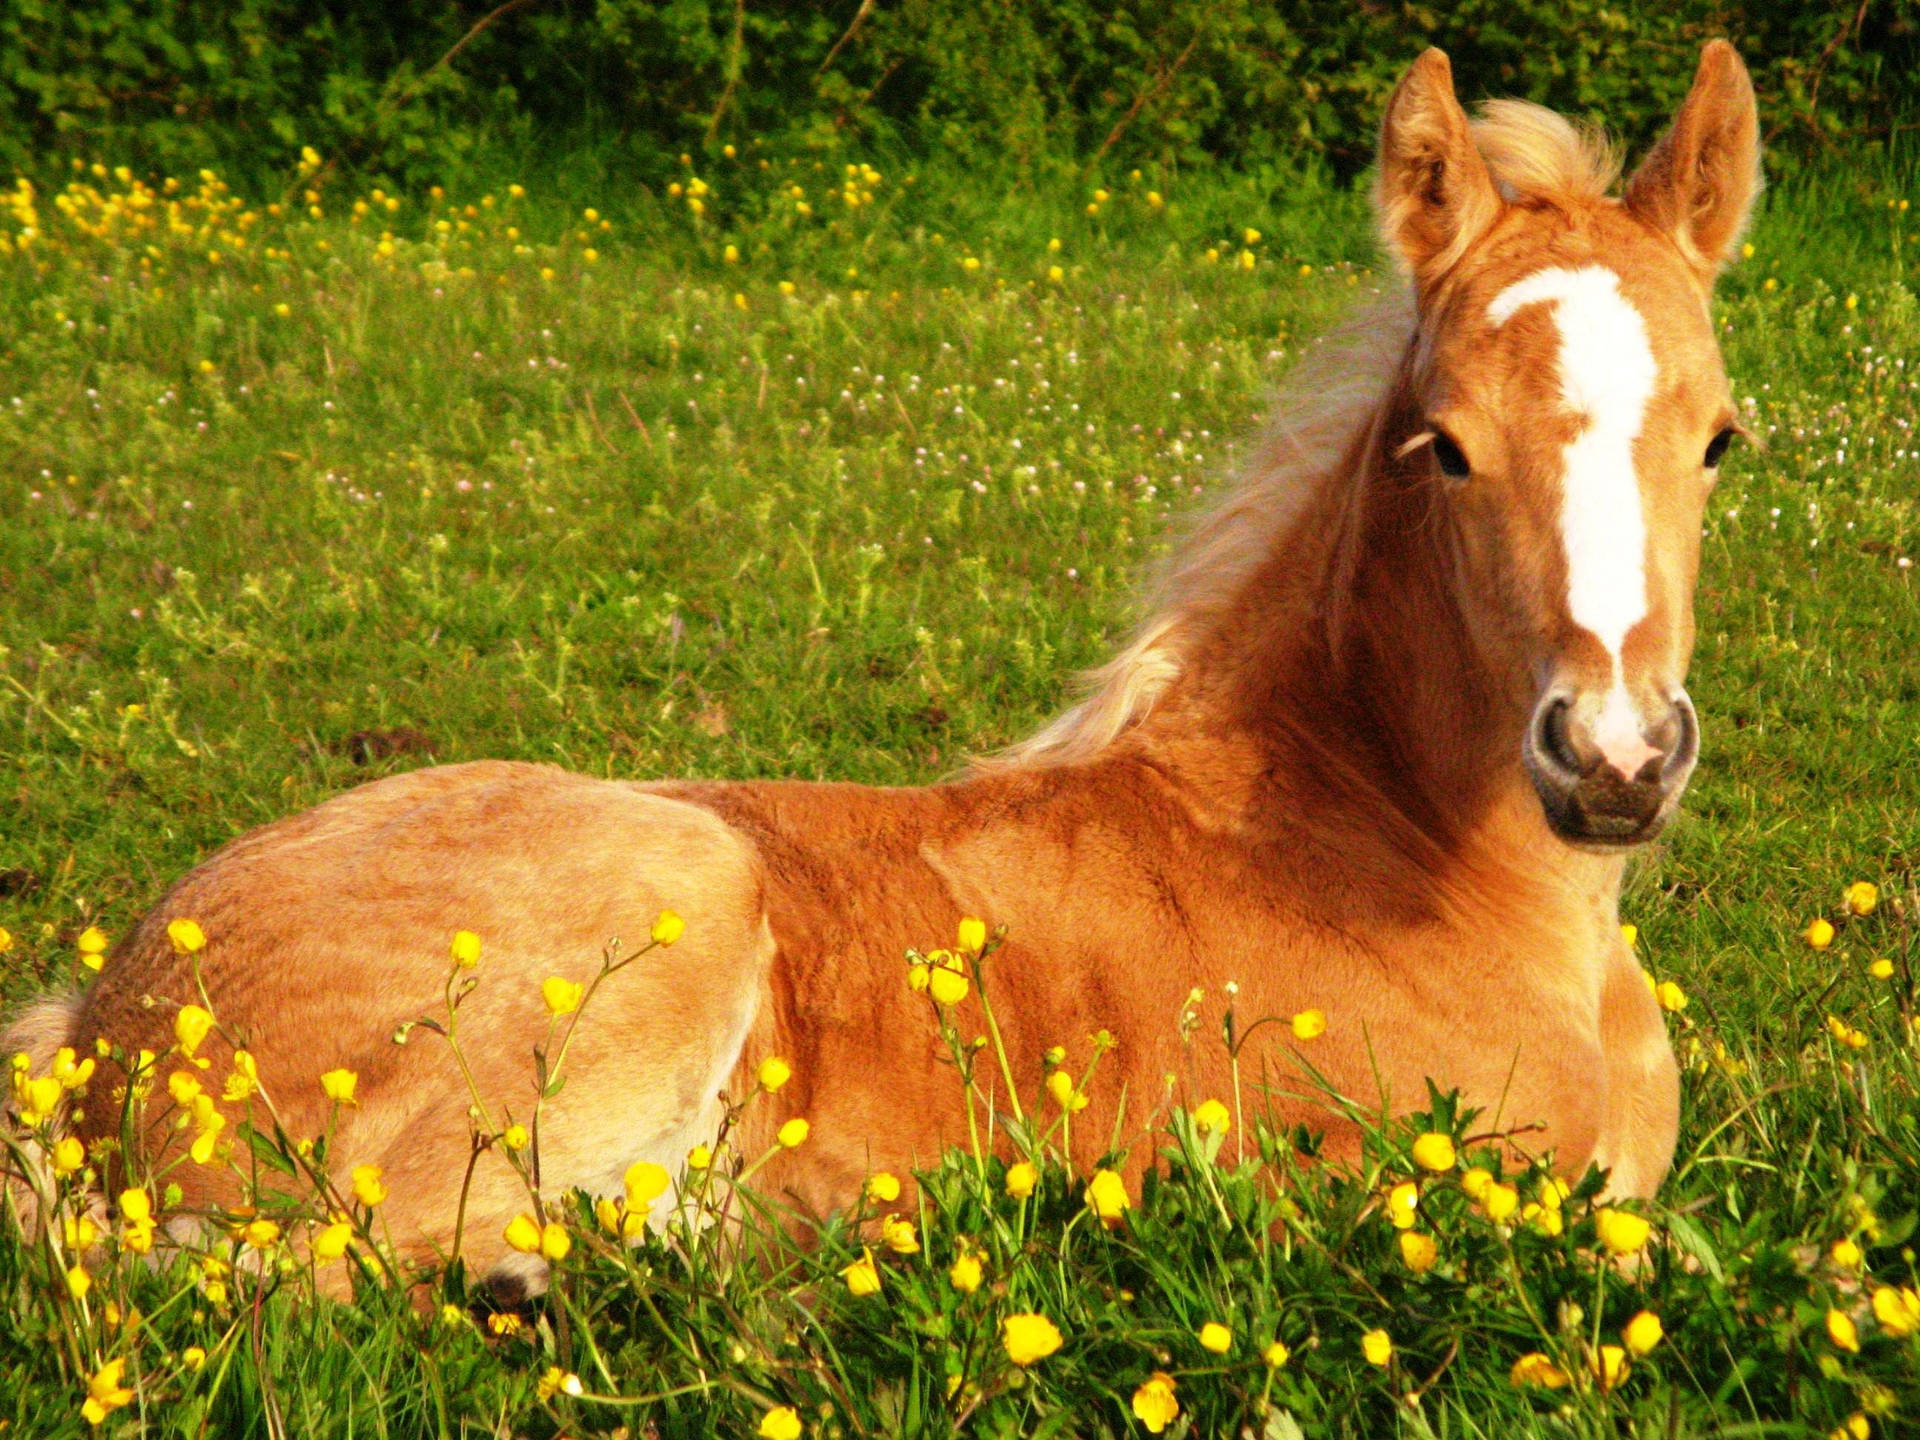 Cute Horse And Yellow Flowers